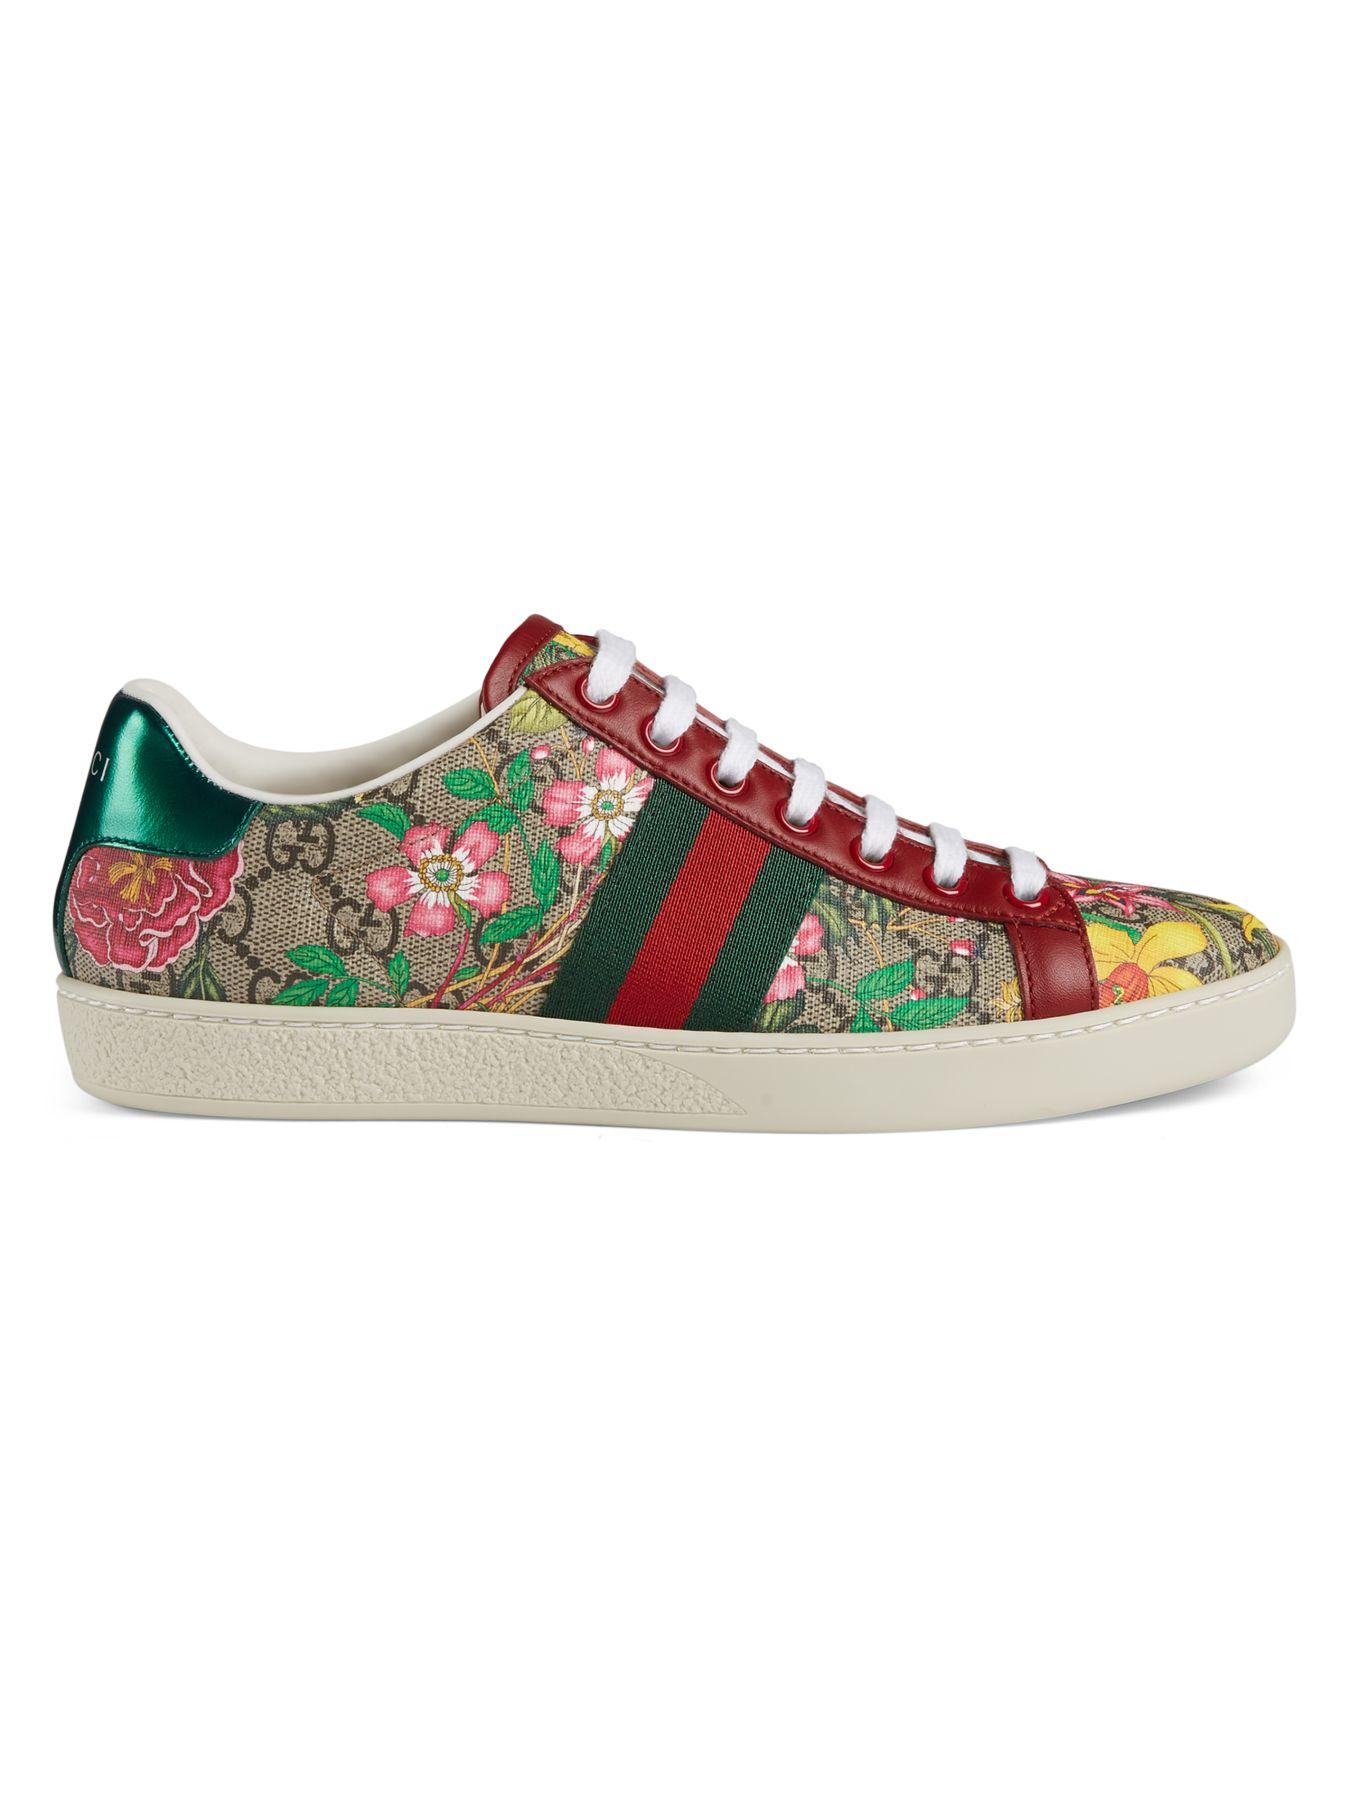 Gucci Canvas Ace GG Floral Sneakers - Lyst